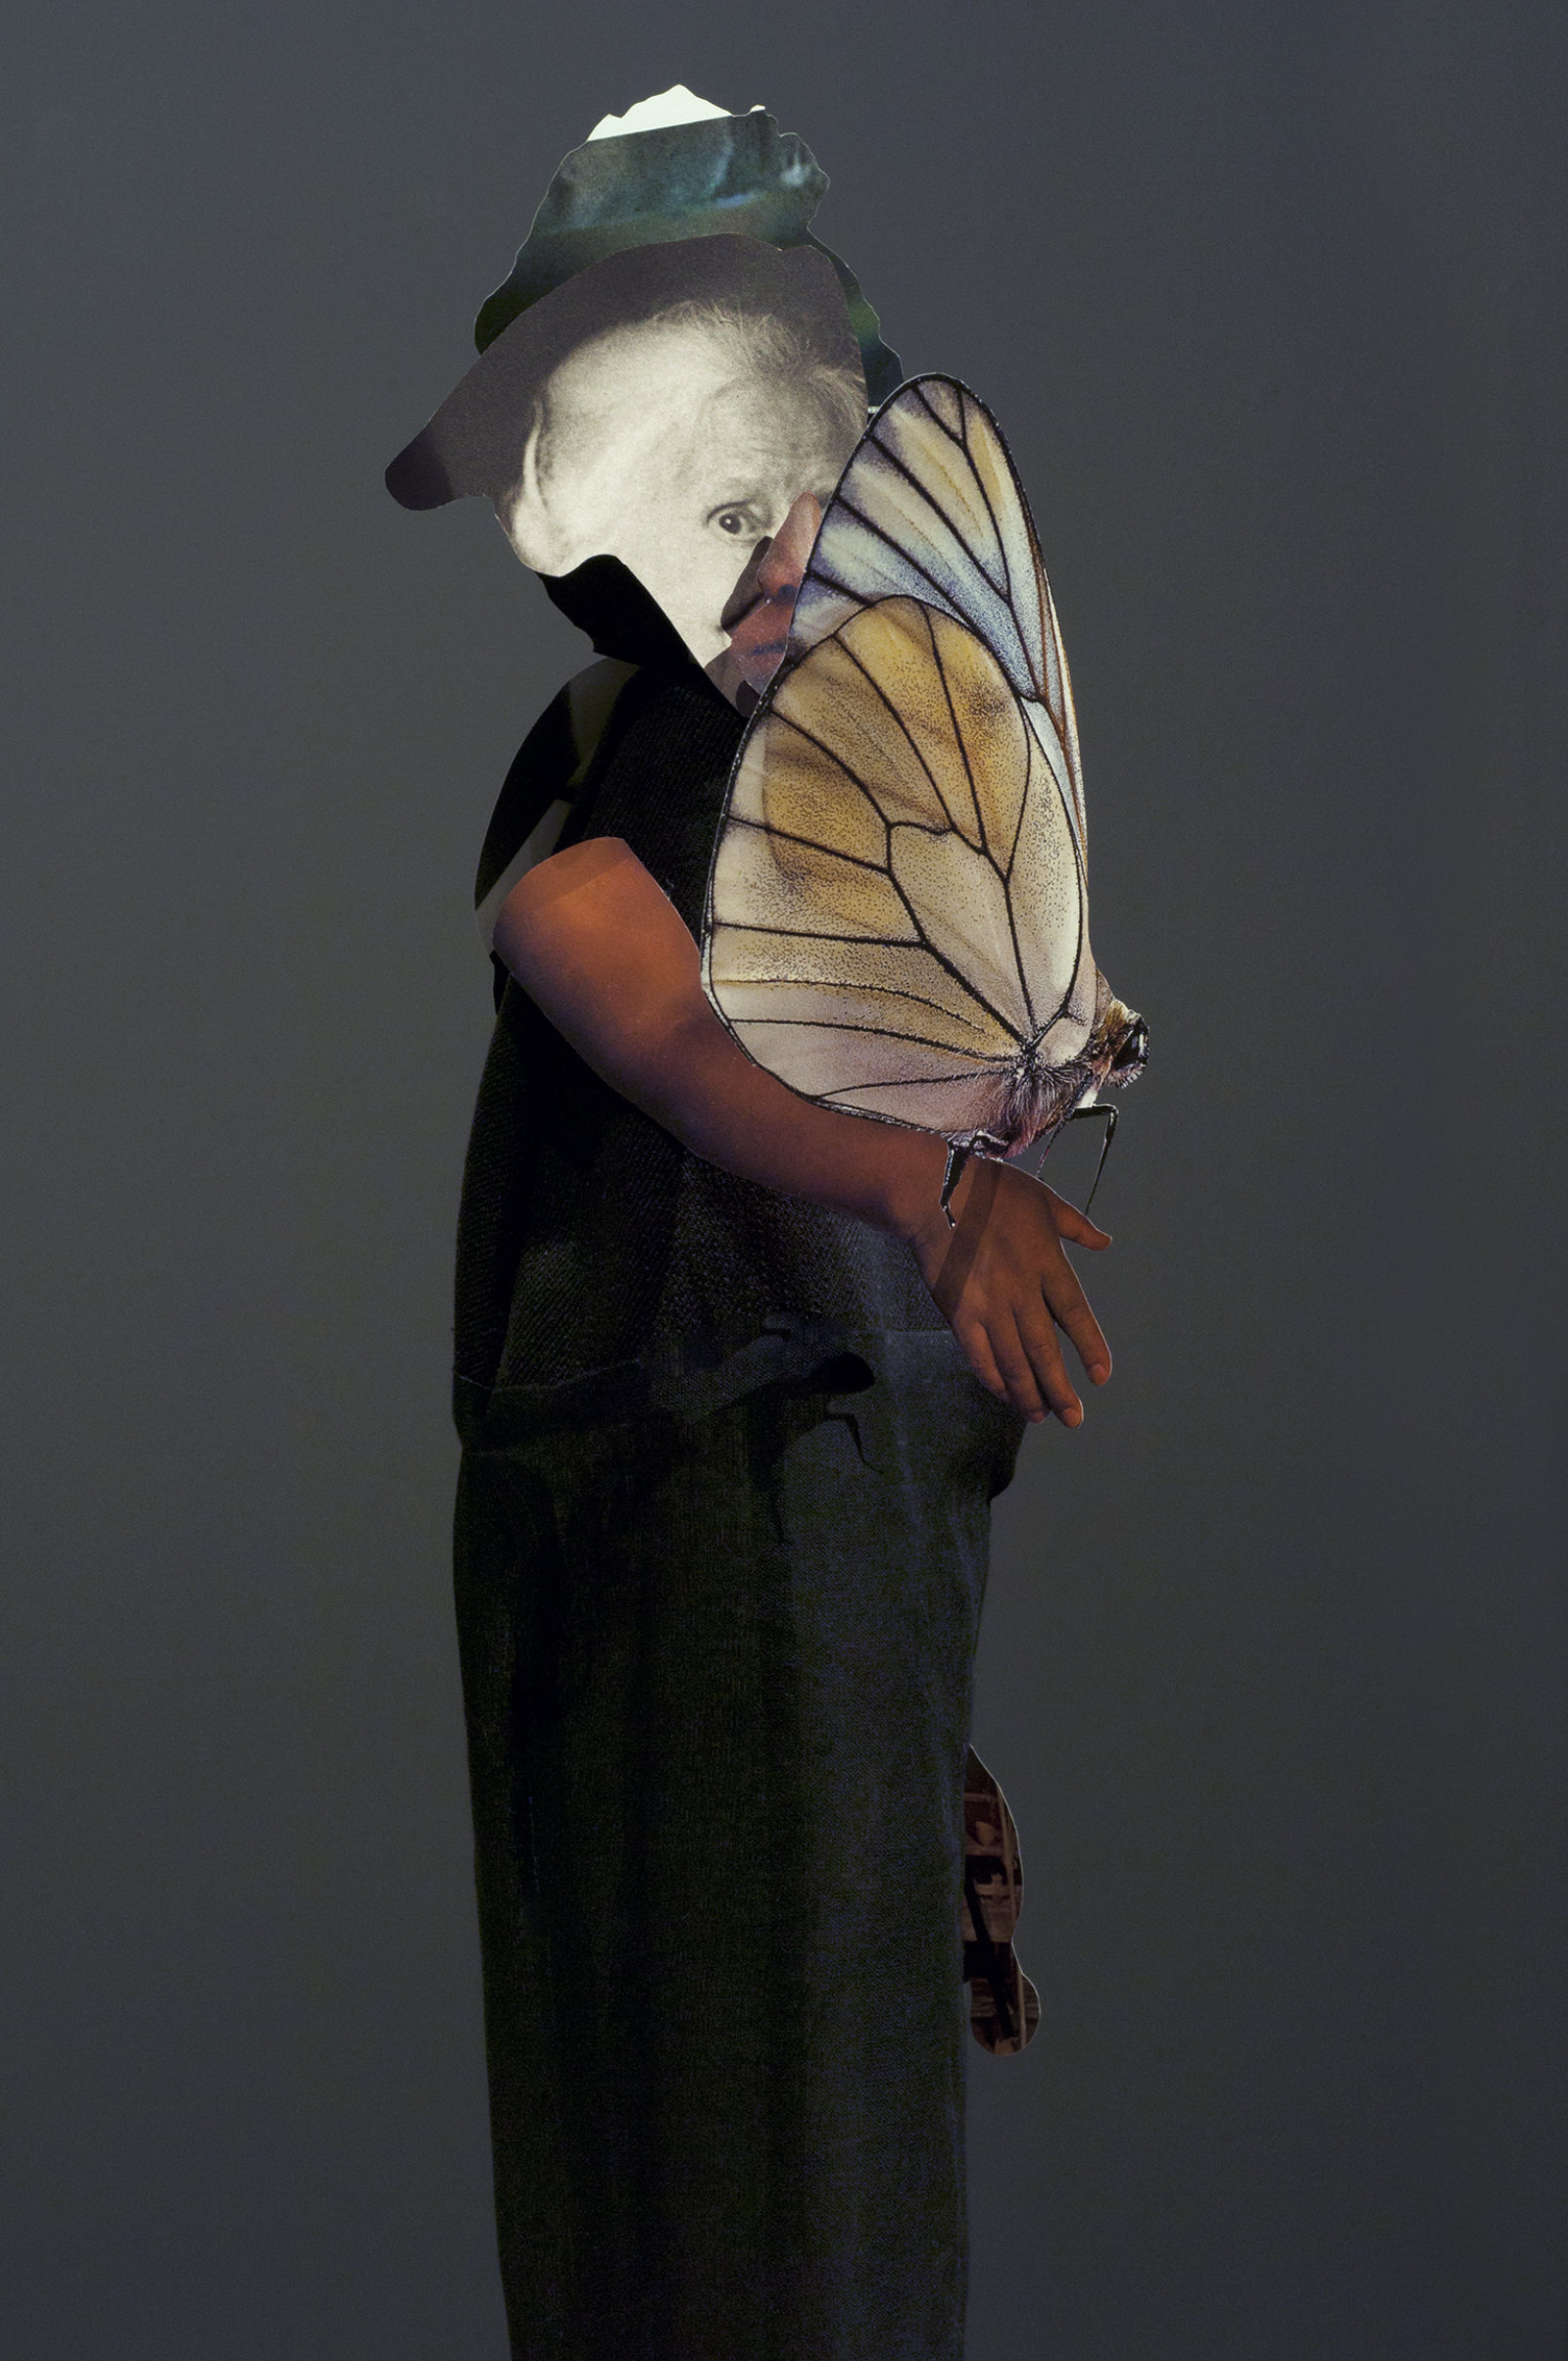 Geoffrey Farmer, The Surgeon and the Photographer, 2009, paper, textile, wood, and metal, 365 figures, dimensions variable. Installation view, Barbican Centre, London, 2013